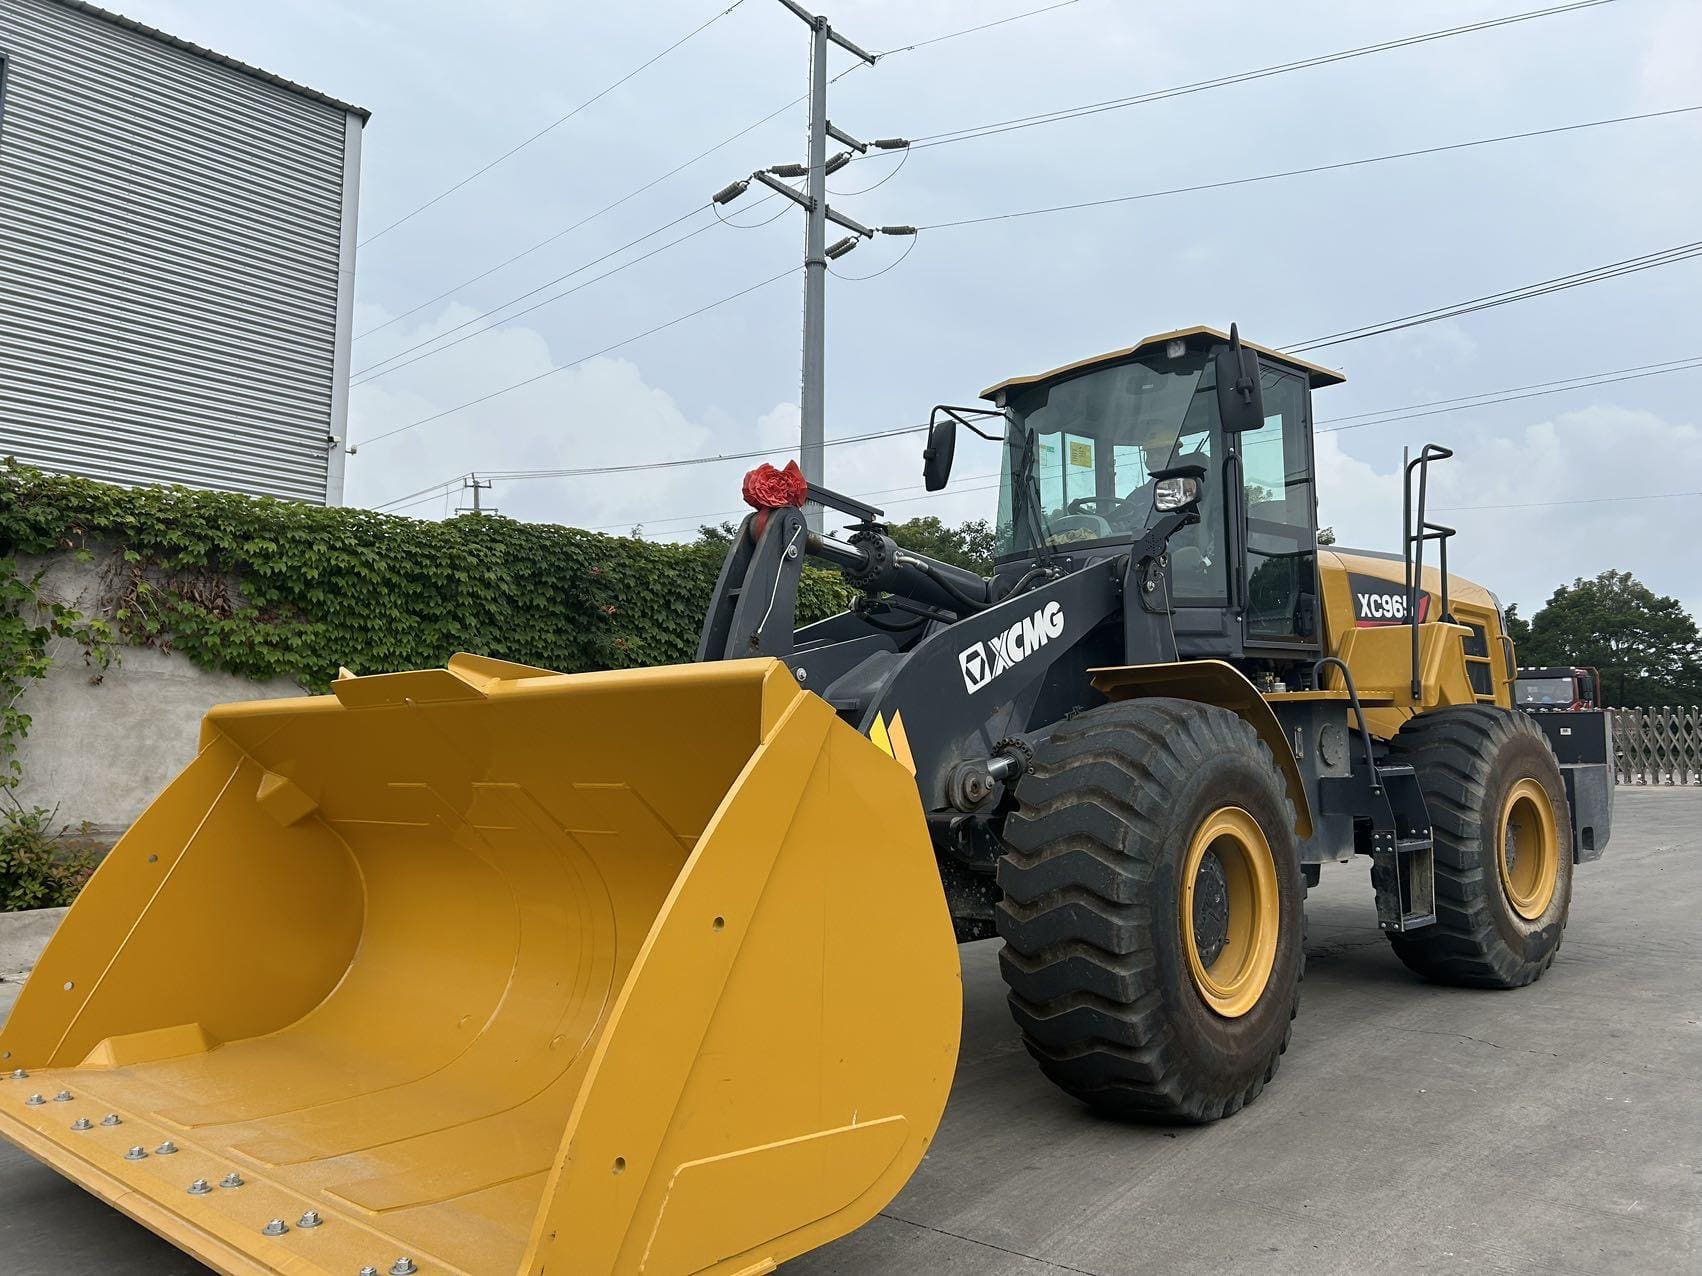 XCMG used front end loaders XC965 for sale